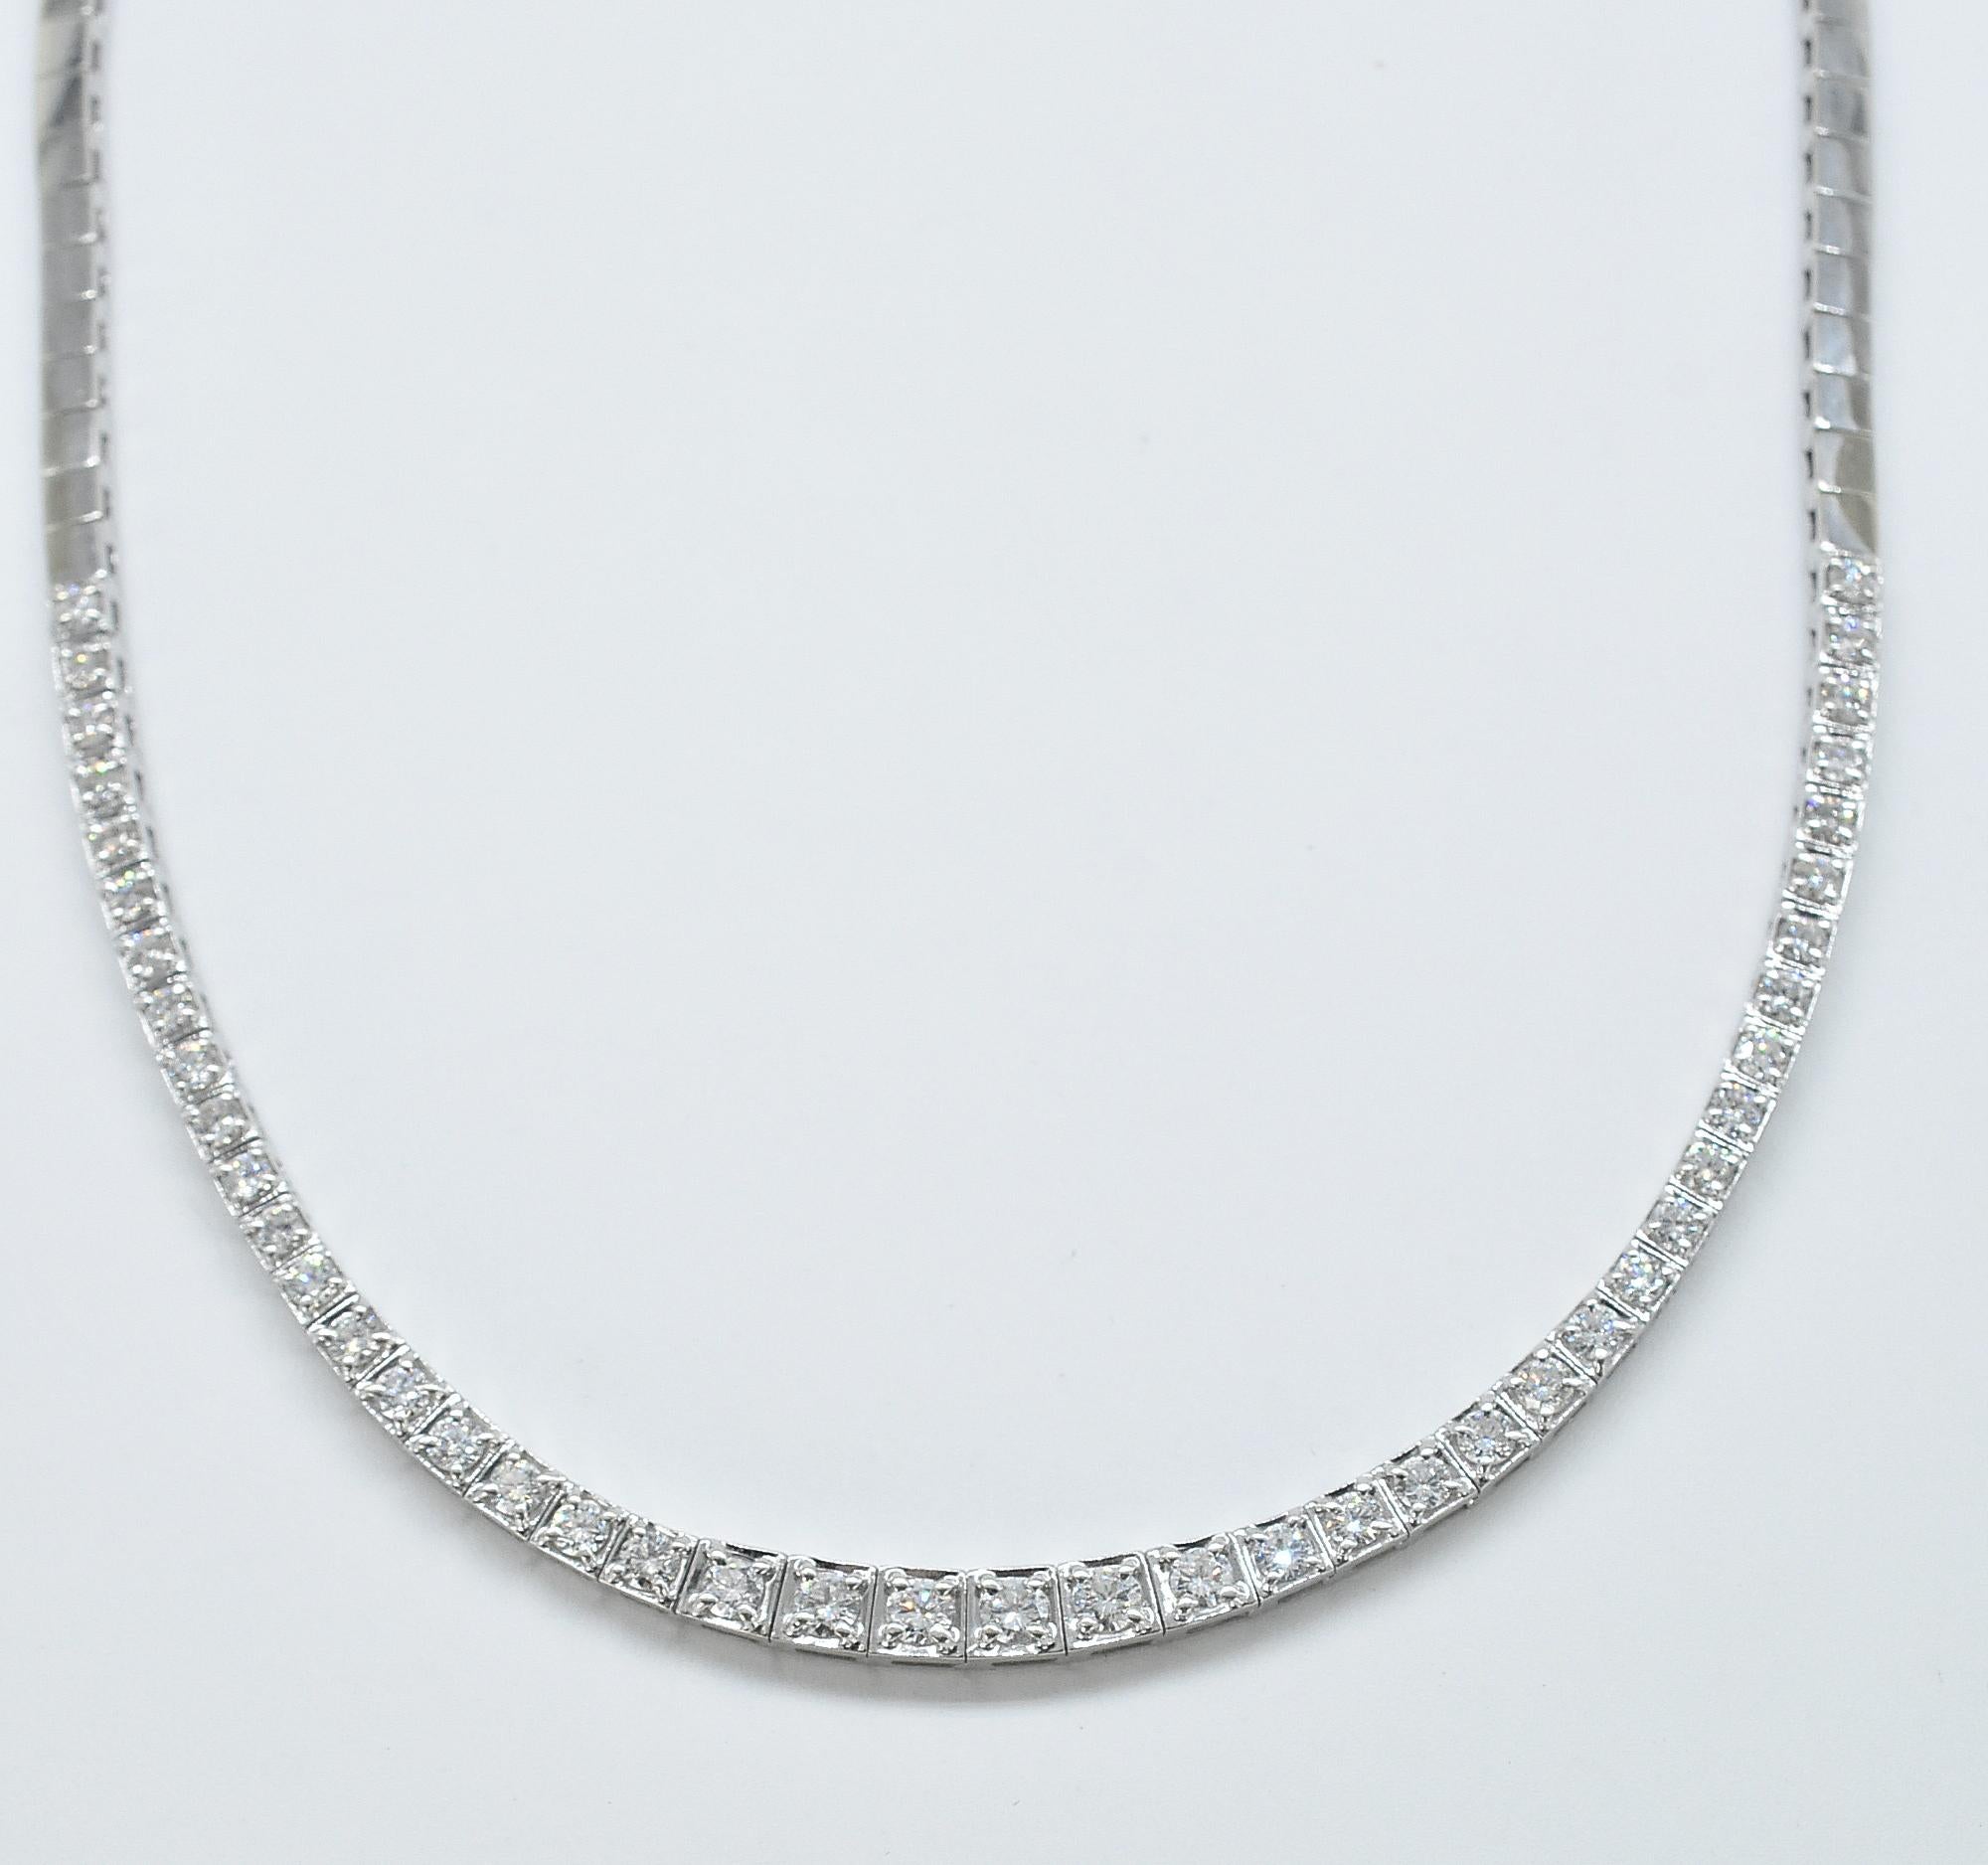 4.05cttw Diamond and White Gold Necklace In Good Condition For Sale In Toledo, OH